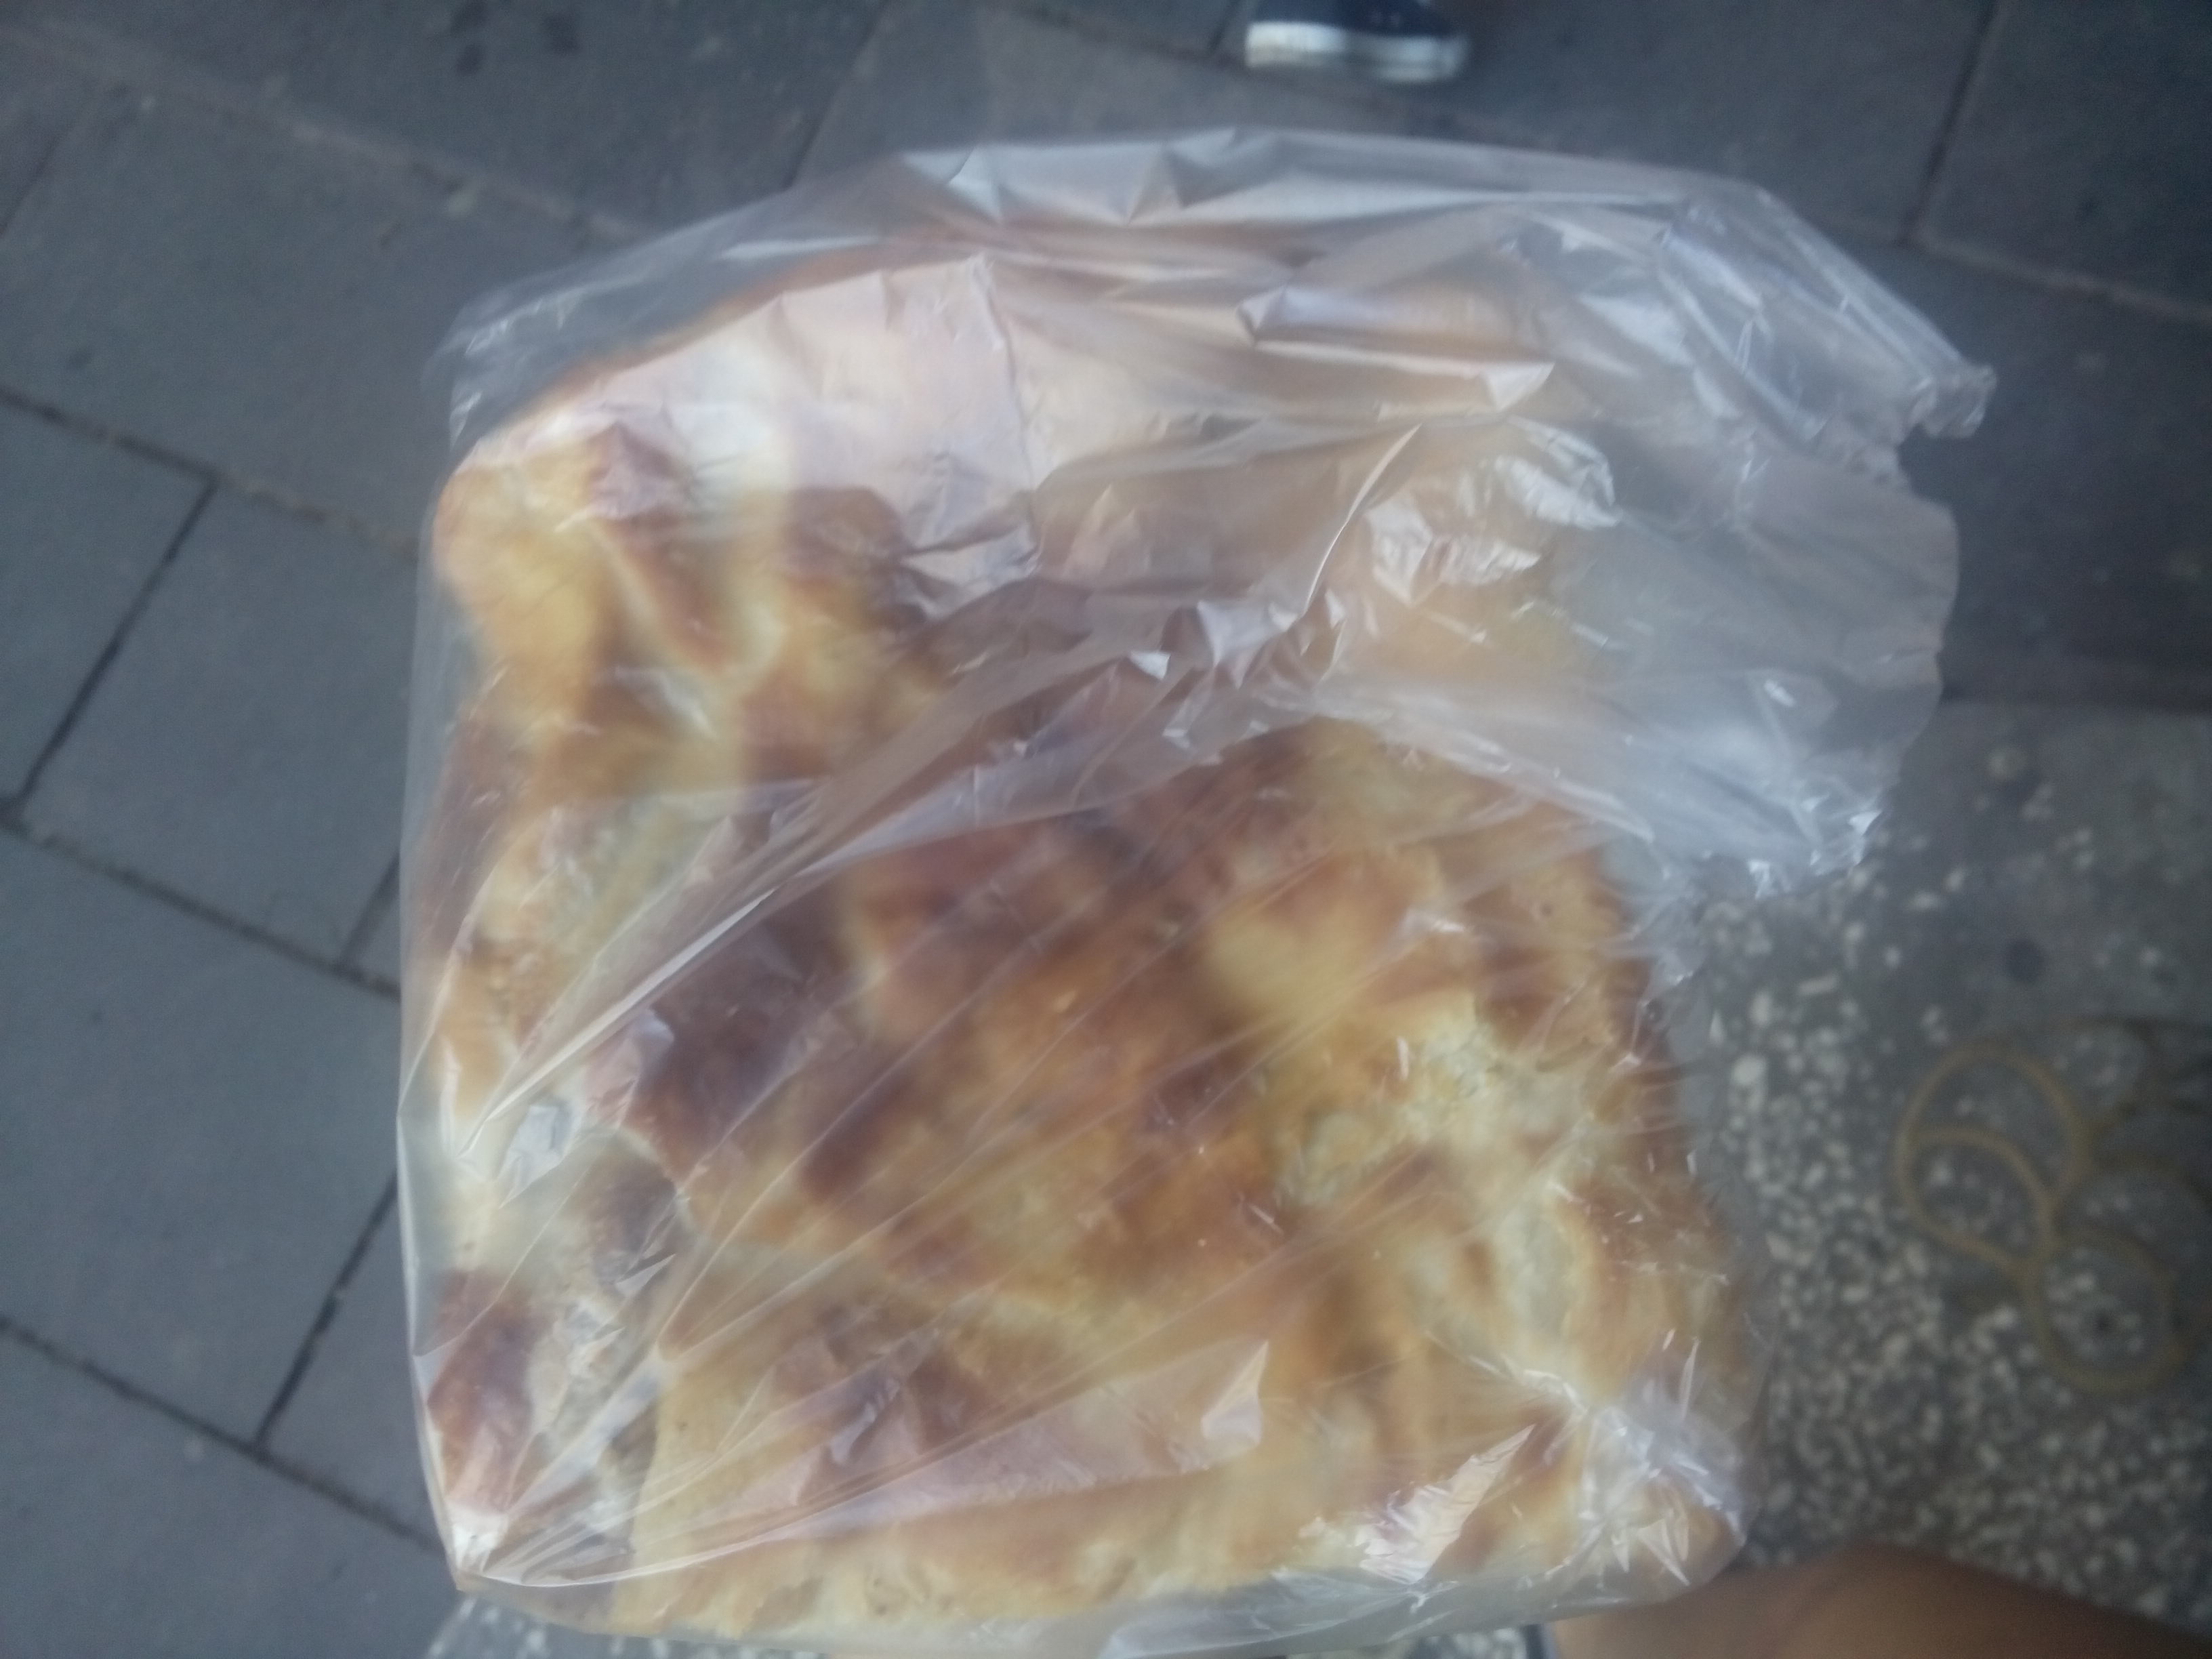 A plastic bag with a pastry in seen from above held over a pavement